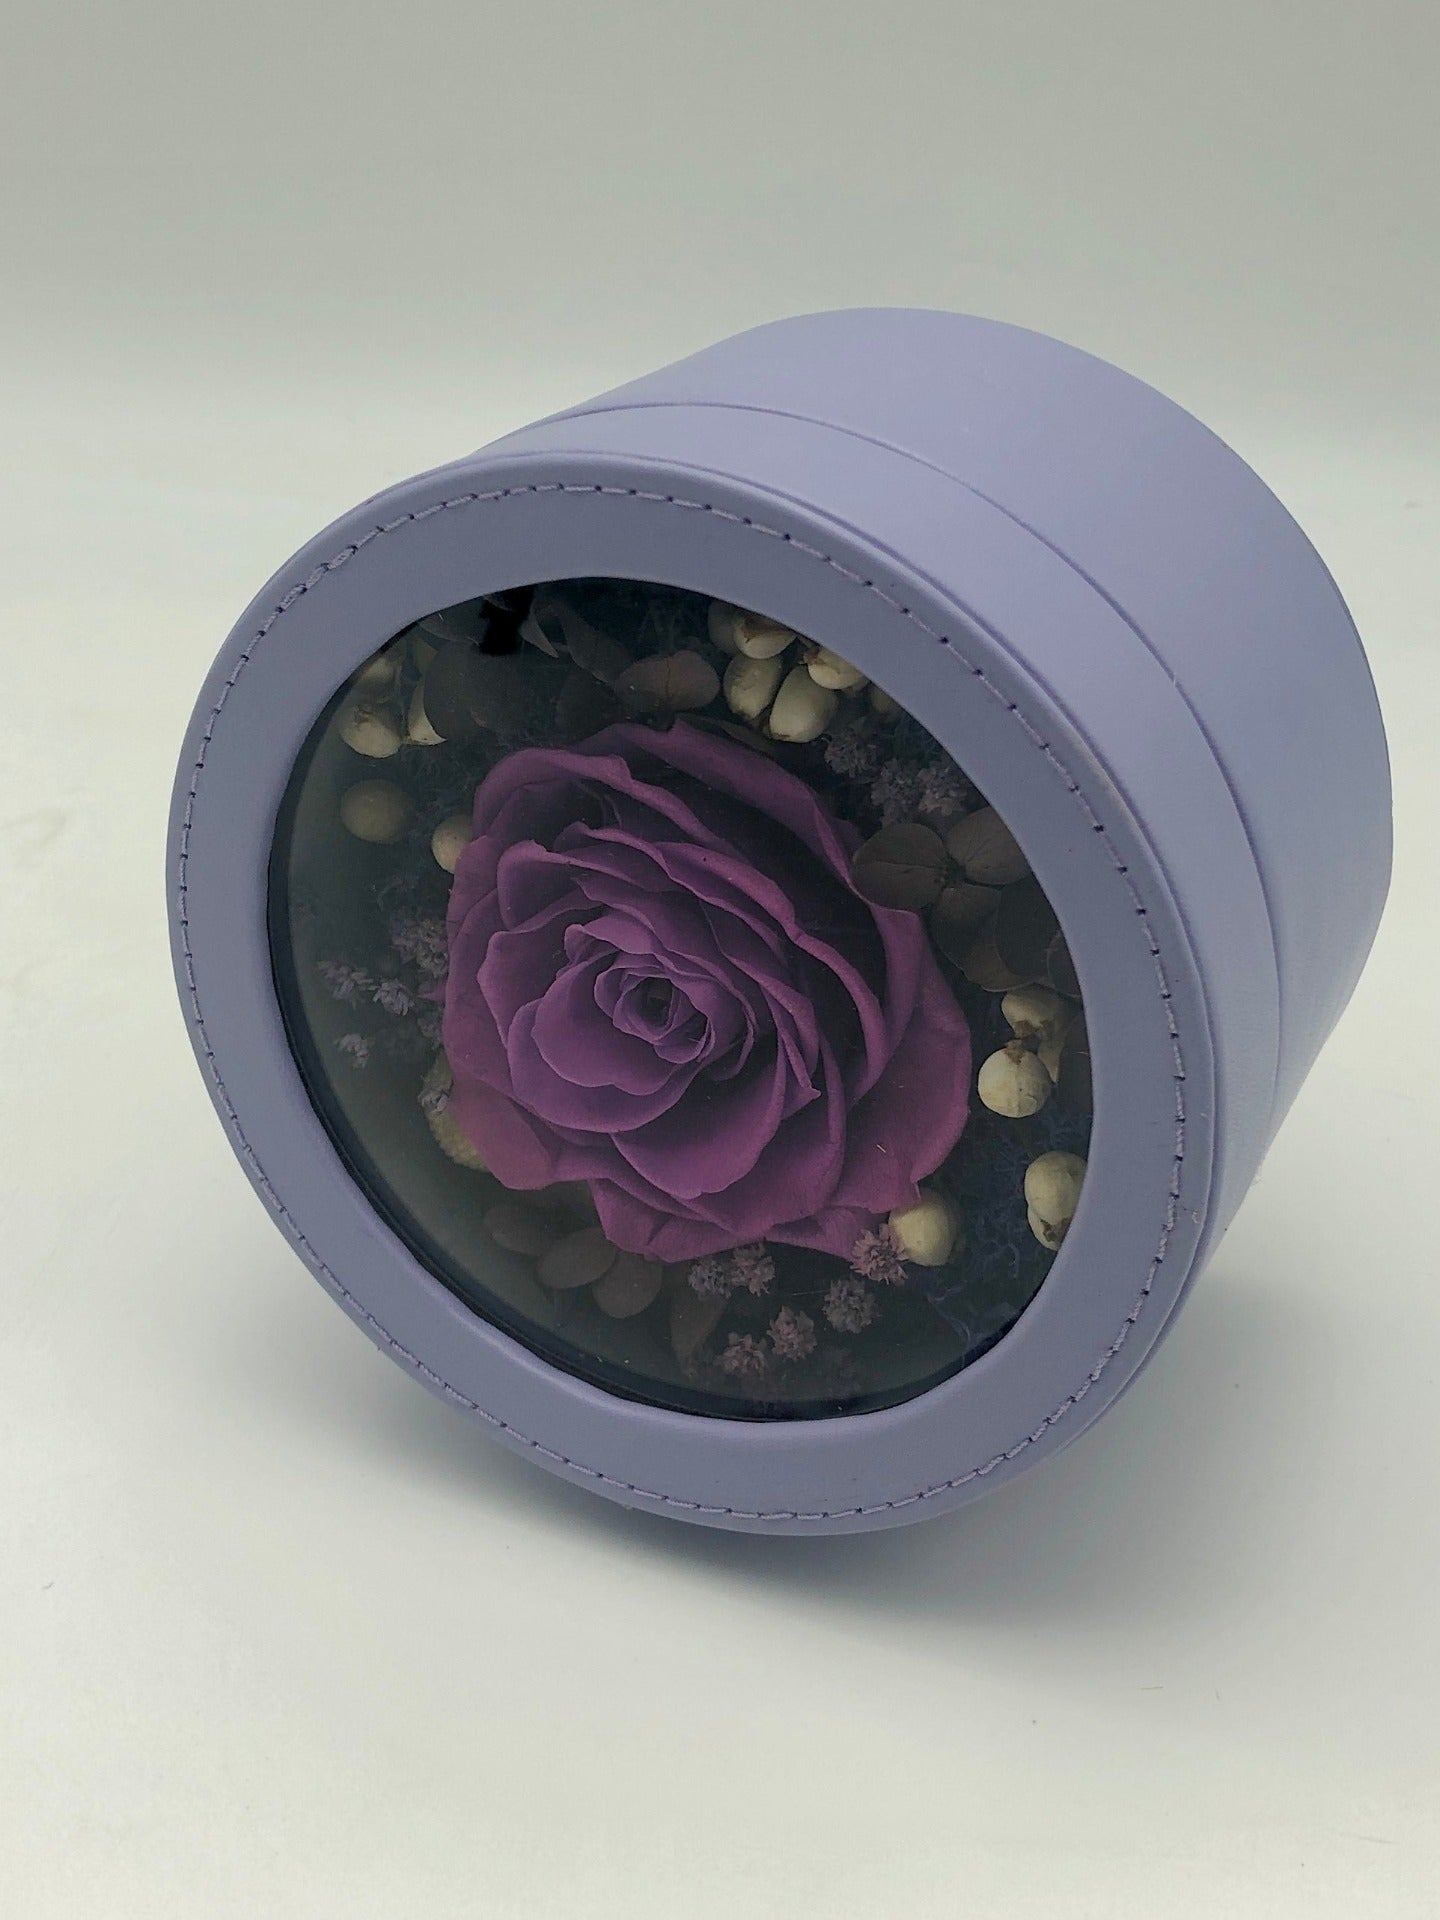 A photo of a captivating purple rose, nestled among white and black flowers, beautifully presented in a light purple round gift box. A perfect symbol of love and elegance.